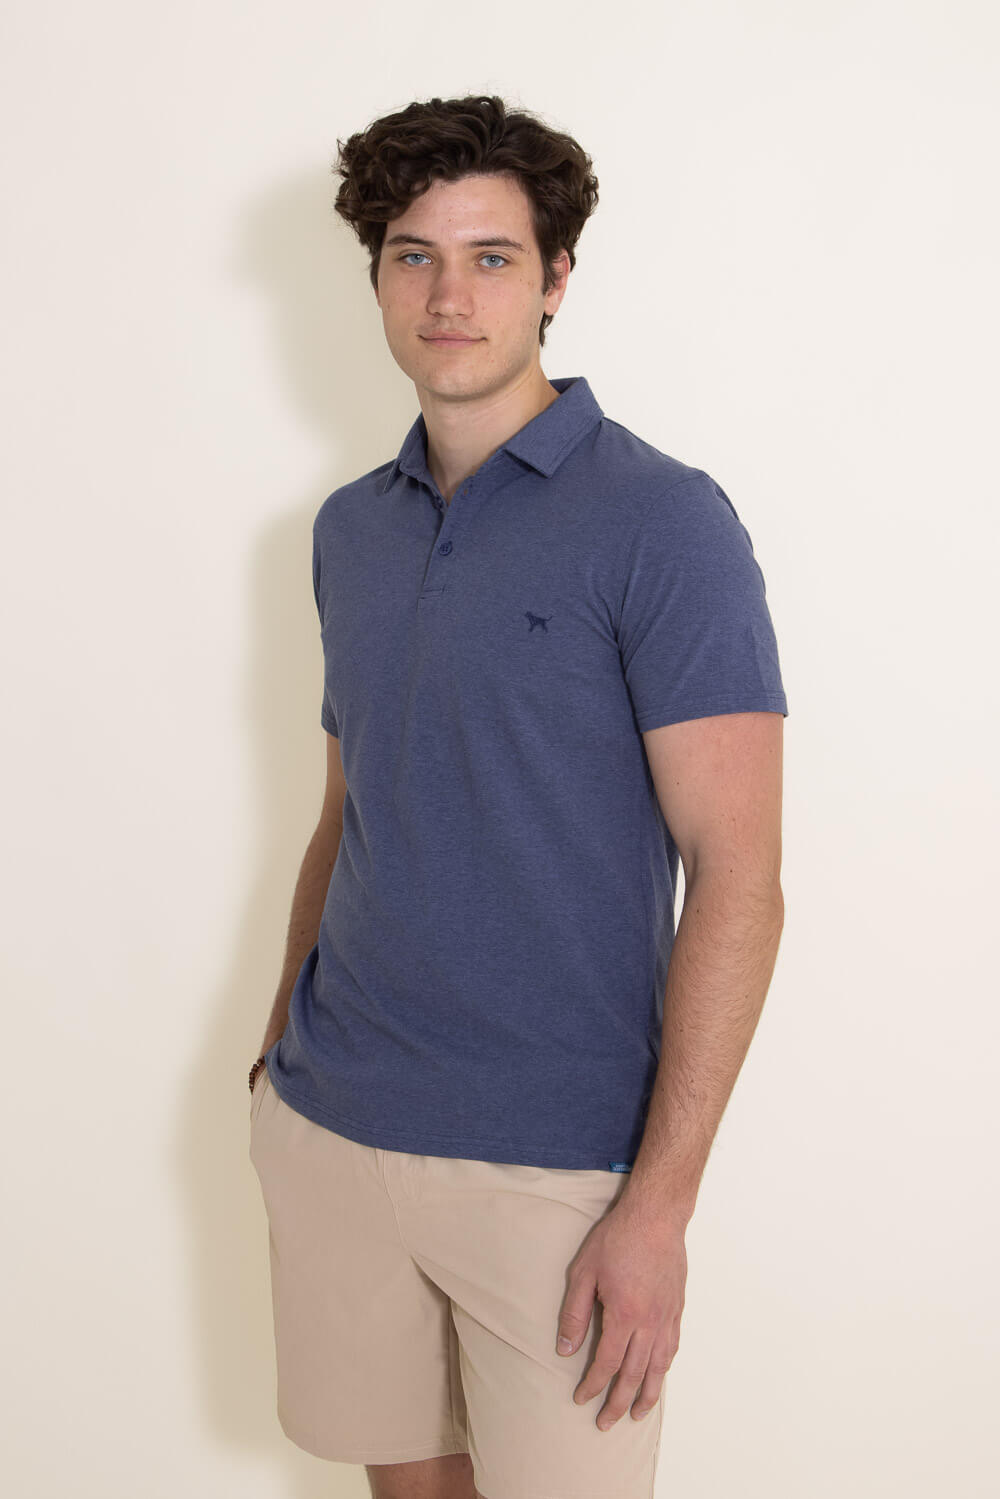 Simply Southern Long Sleeve Colorblock Polo Shirt for Men in Grey